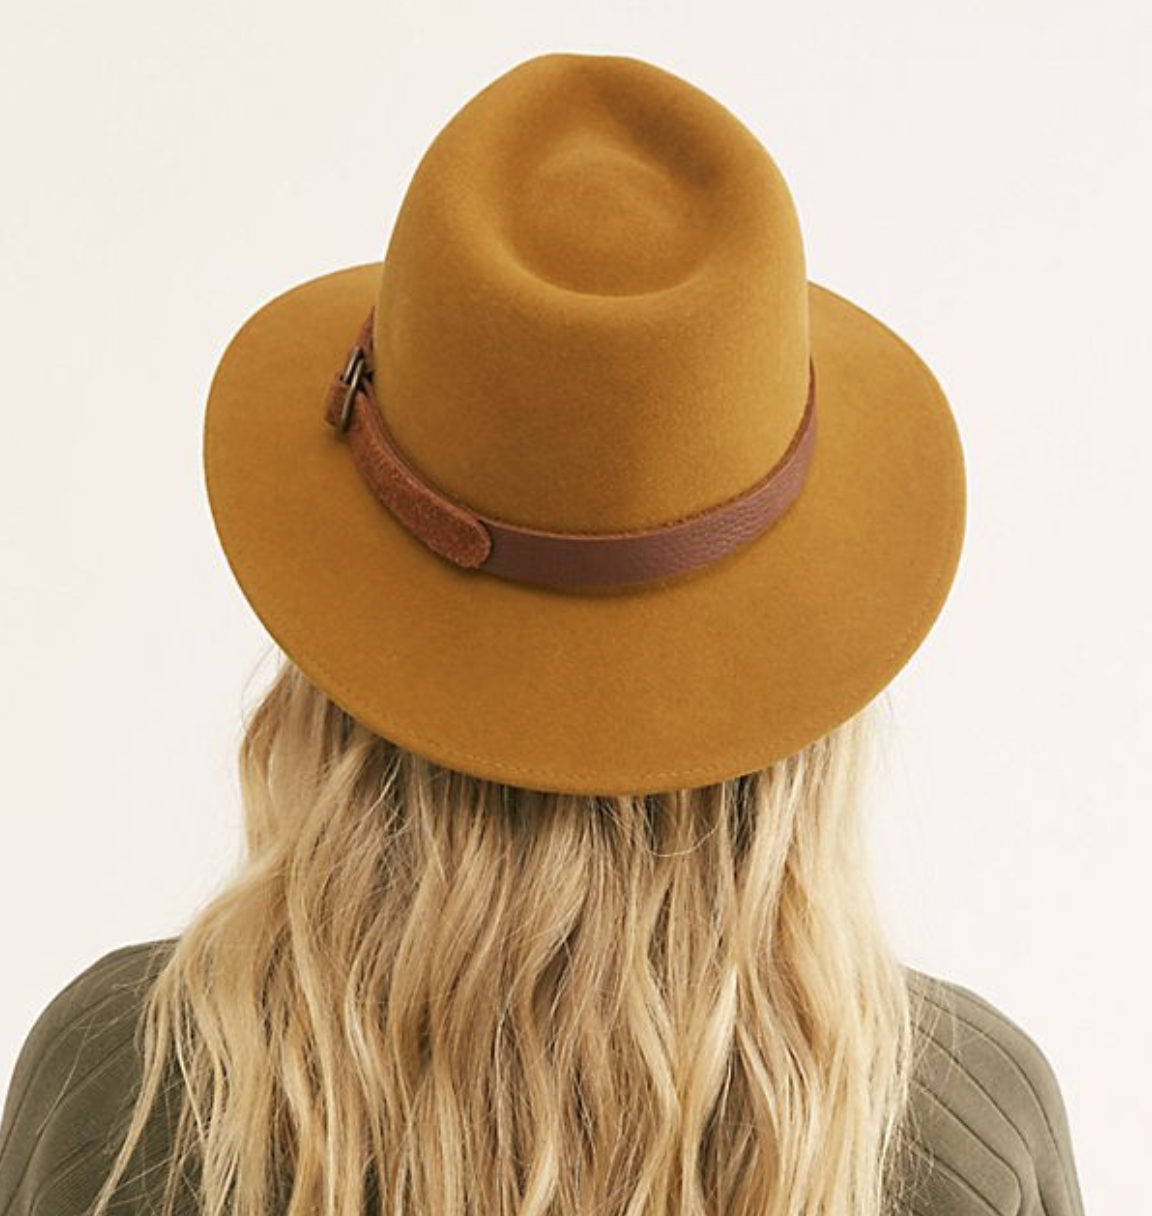 Laura Leigh of Louella Reese shares her favorite summer purchases of winter 2018 including a bronze felt hat